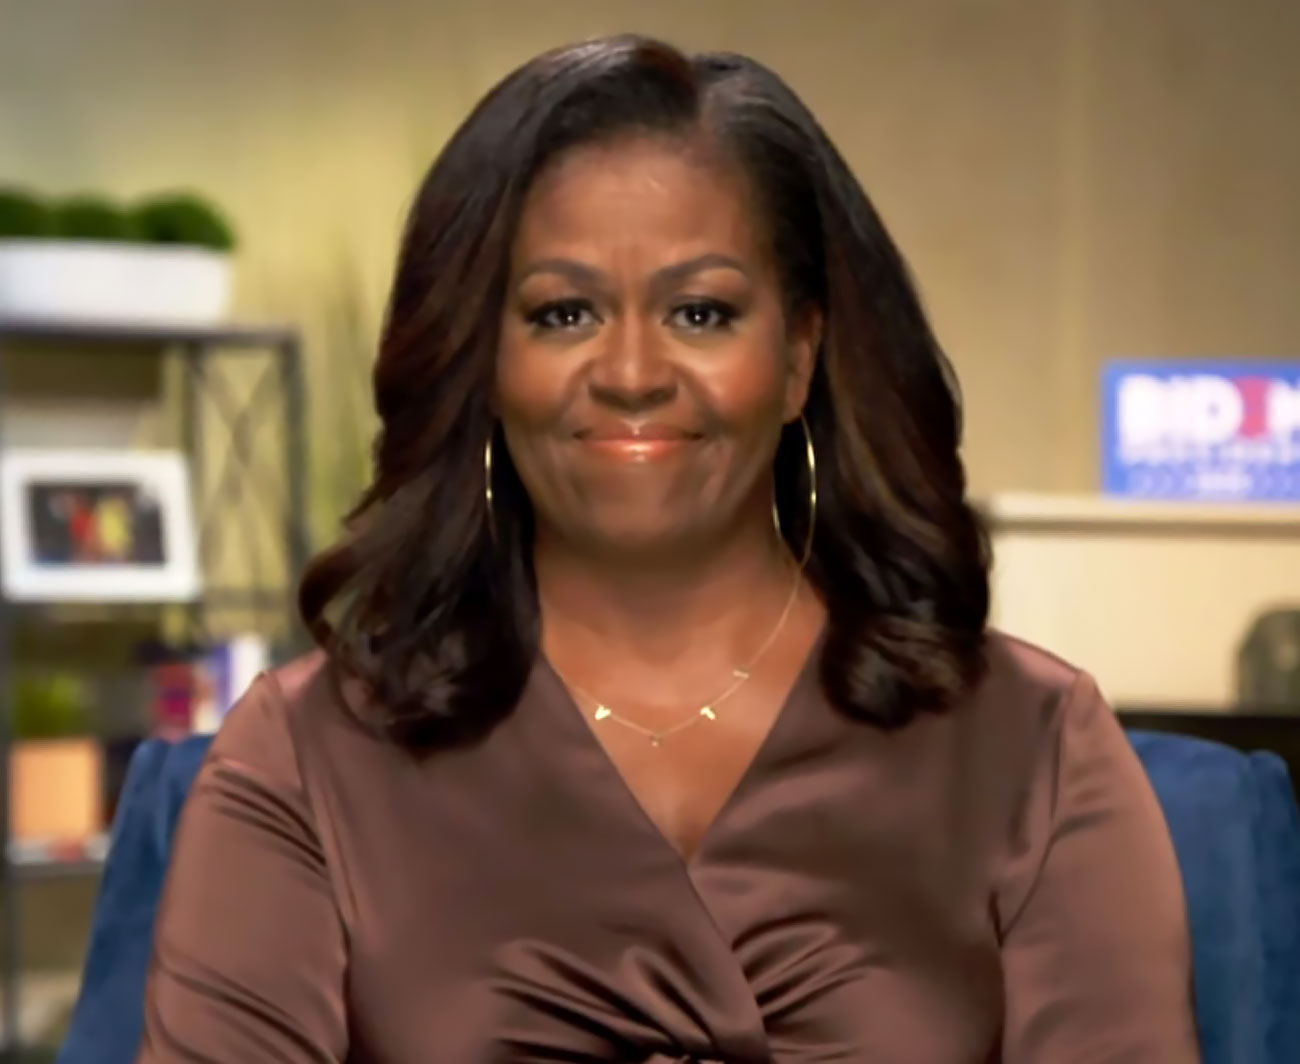 How to Get Michelle Obama’s Exact $430 ‘Vote’ Necklace